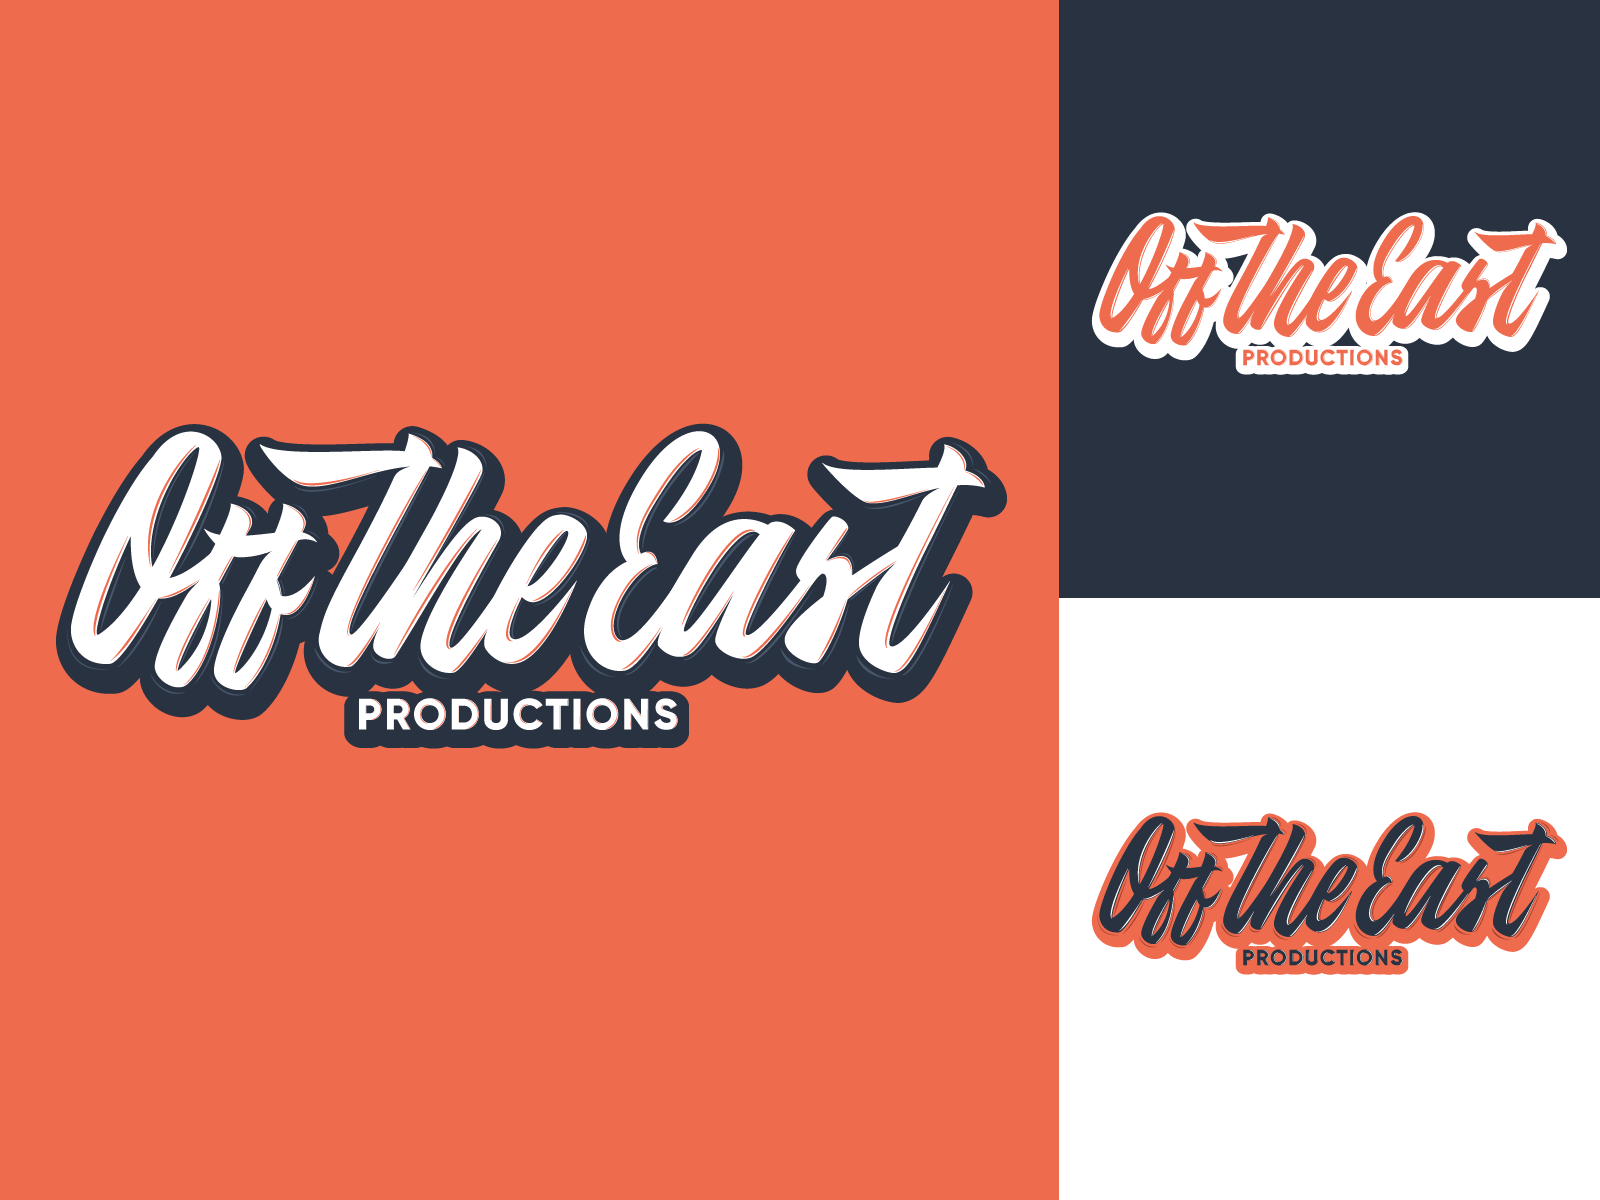 Off the East - Logo for independent production company by Yevdokimov on ...